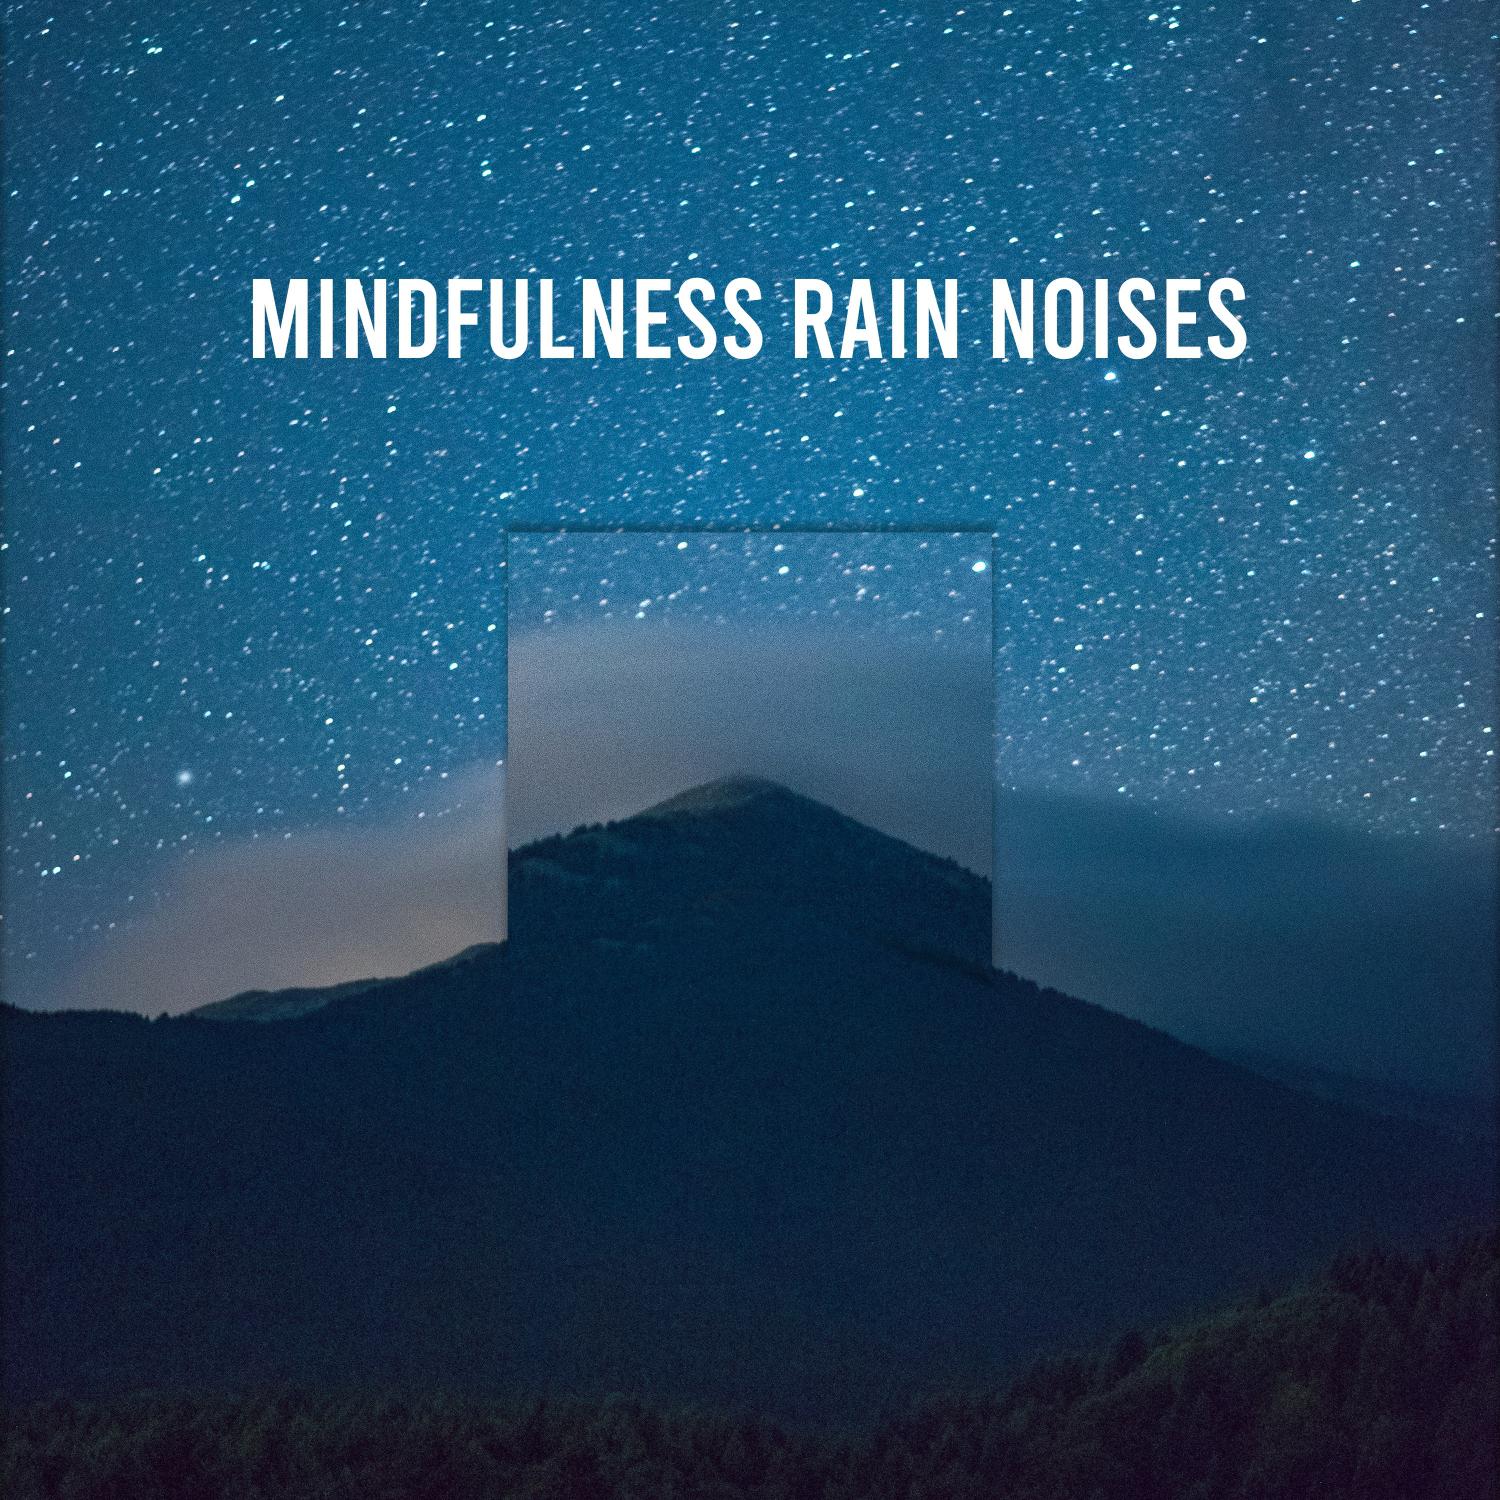 12 Mindfulness Rain Noises to Calm the Mind & Relax